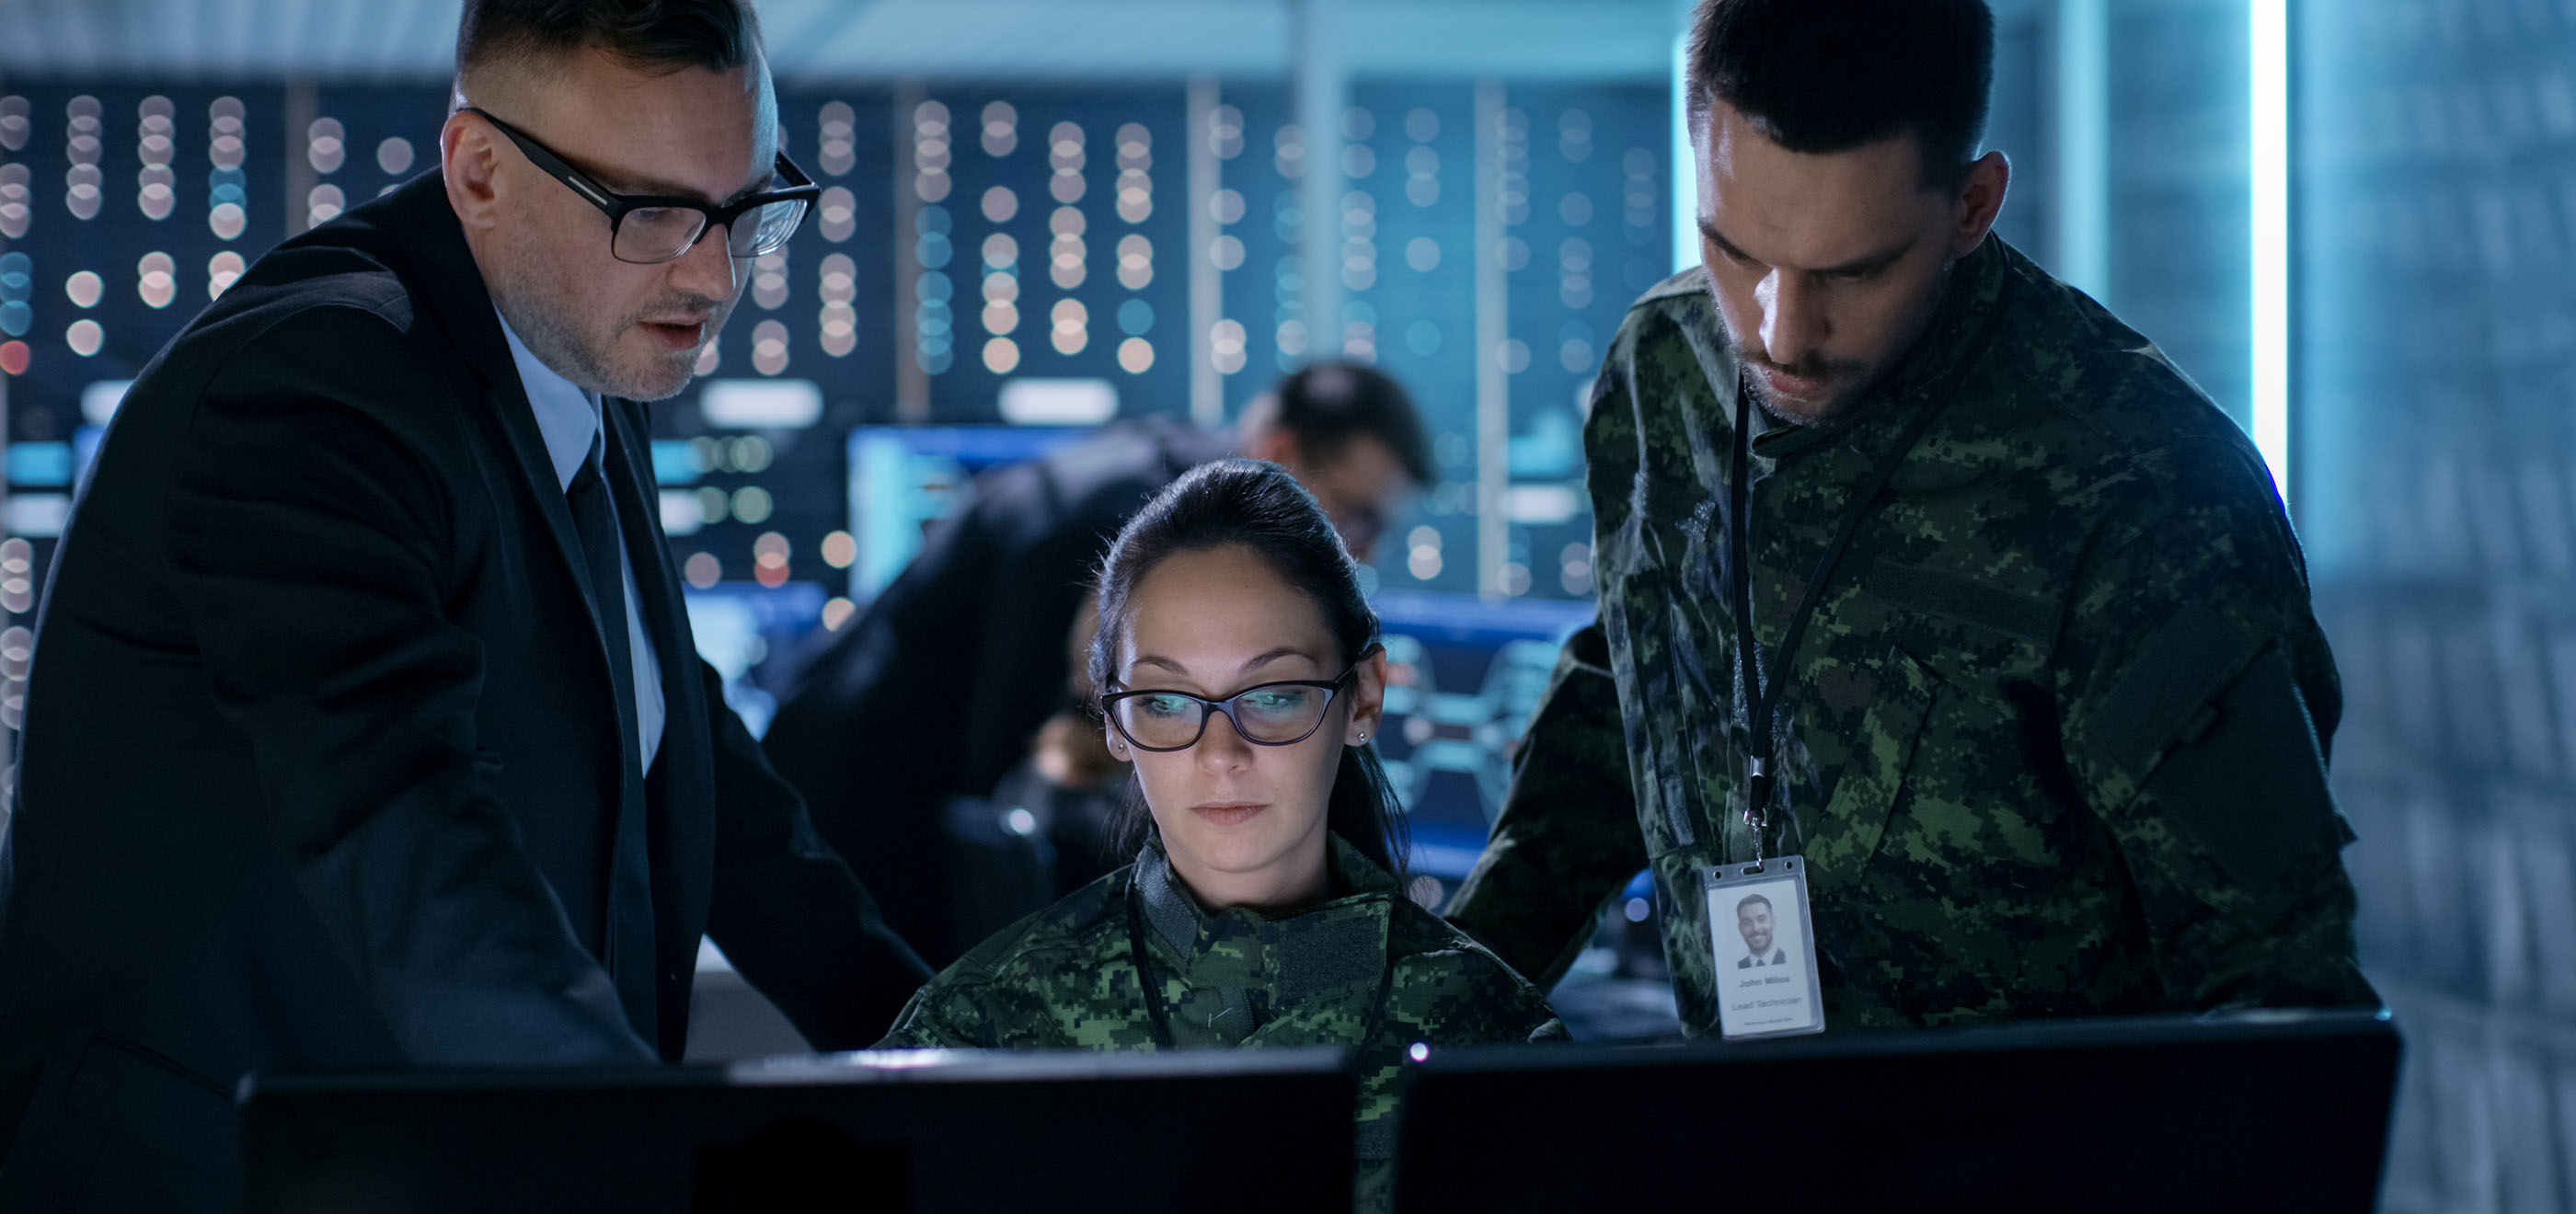 two coworkers in military uniforms working on computer